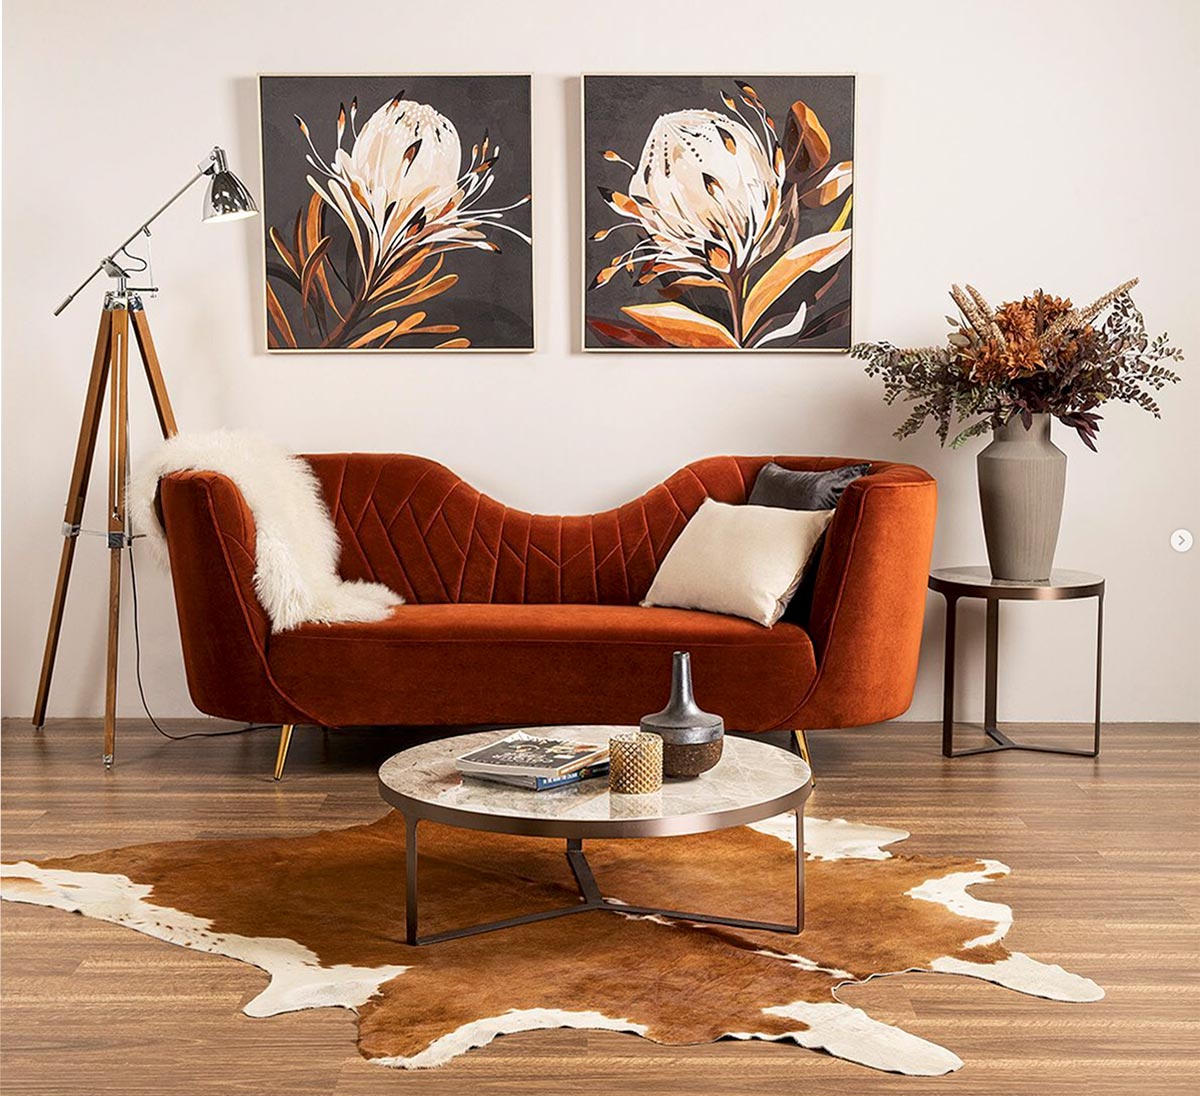 Product furniture photography of orange eclectic couch cow hide rug